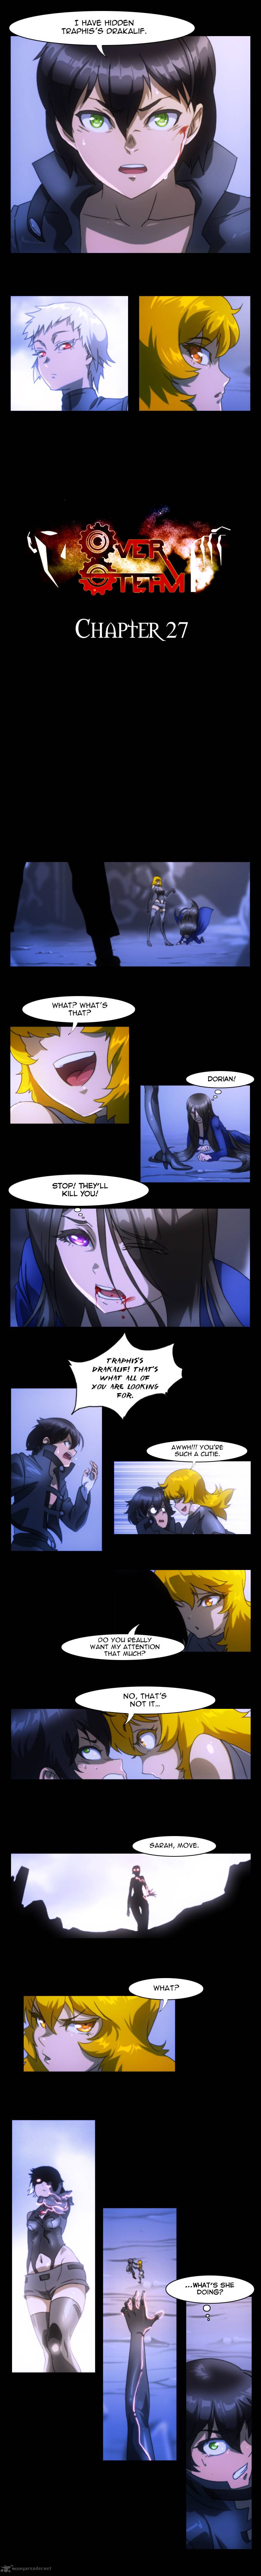 Over Steam Chapter 27 Page 2